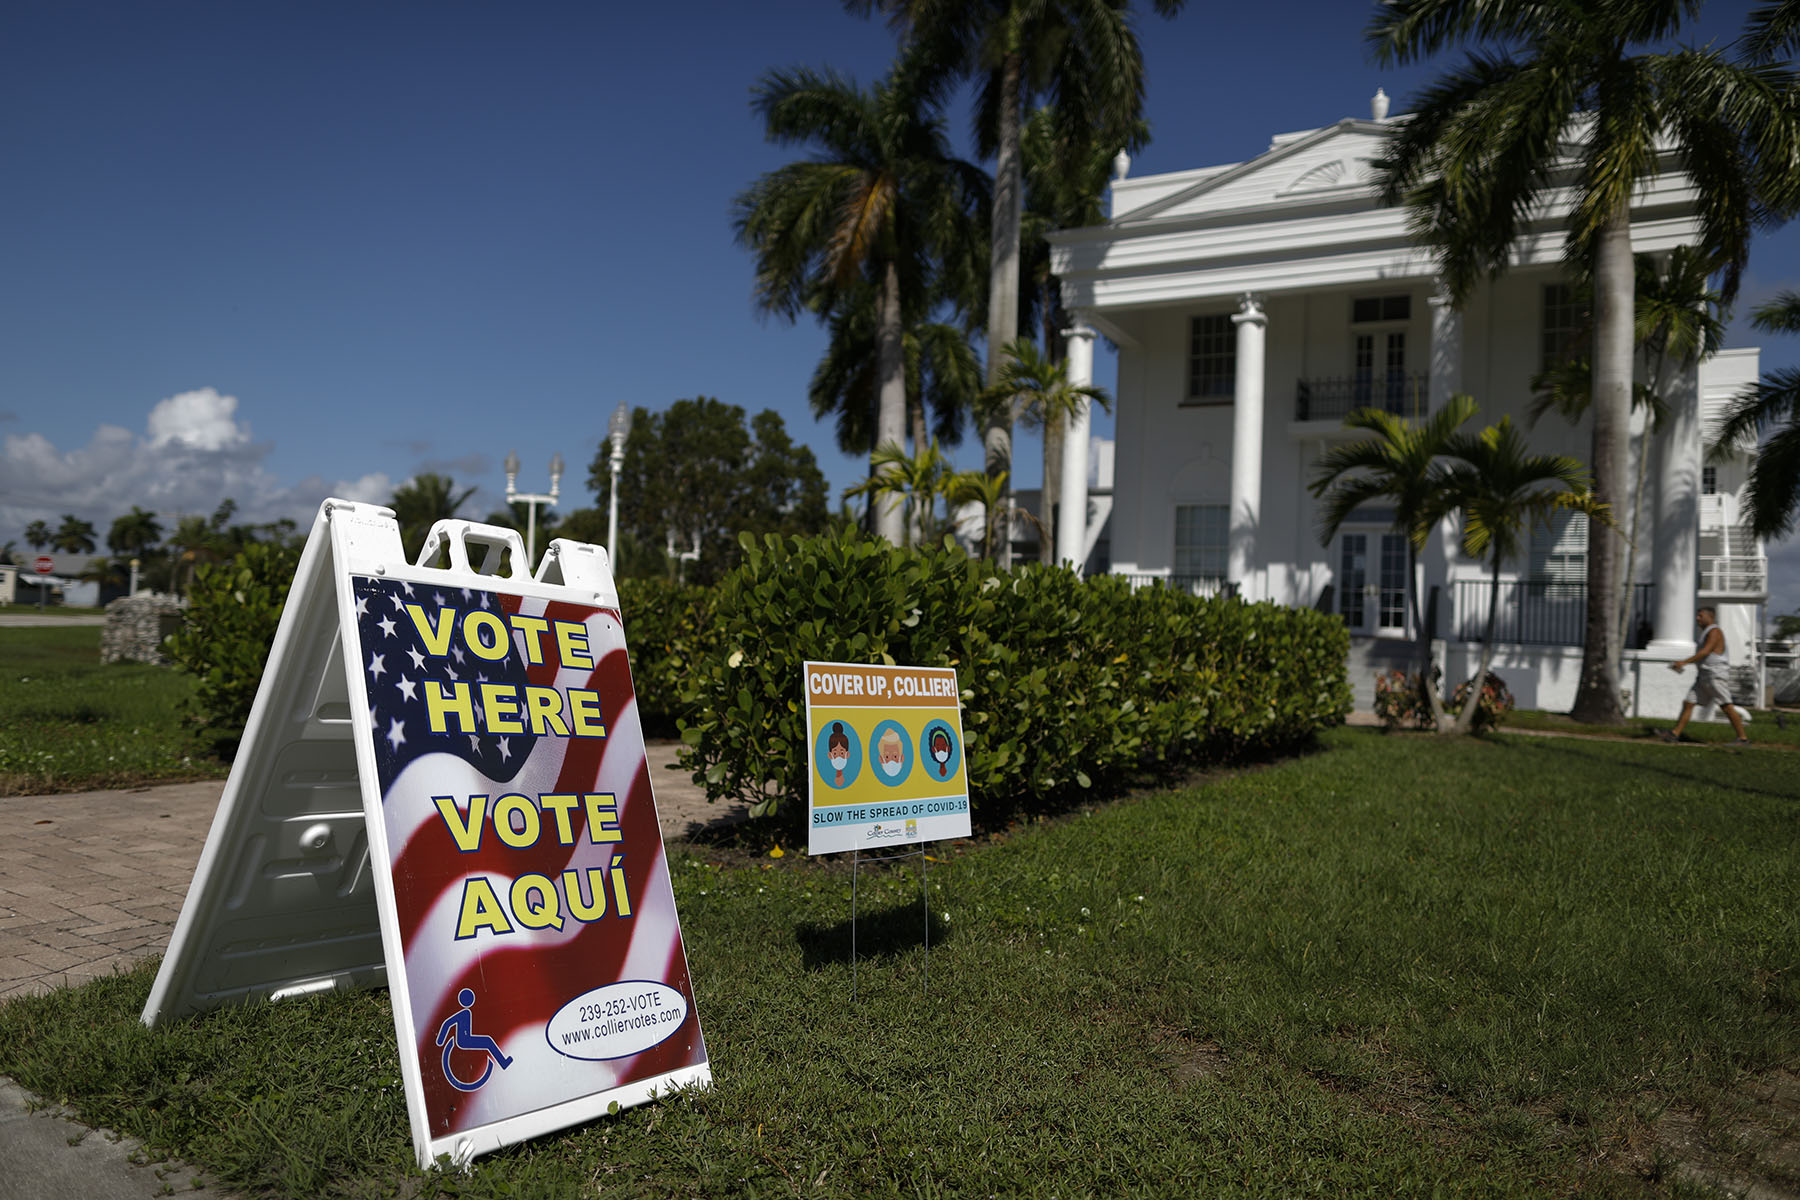 A voting sign in english and spanish is seen as a man walks into City Hall in Everglades City, Florida.